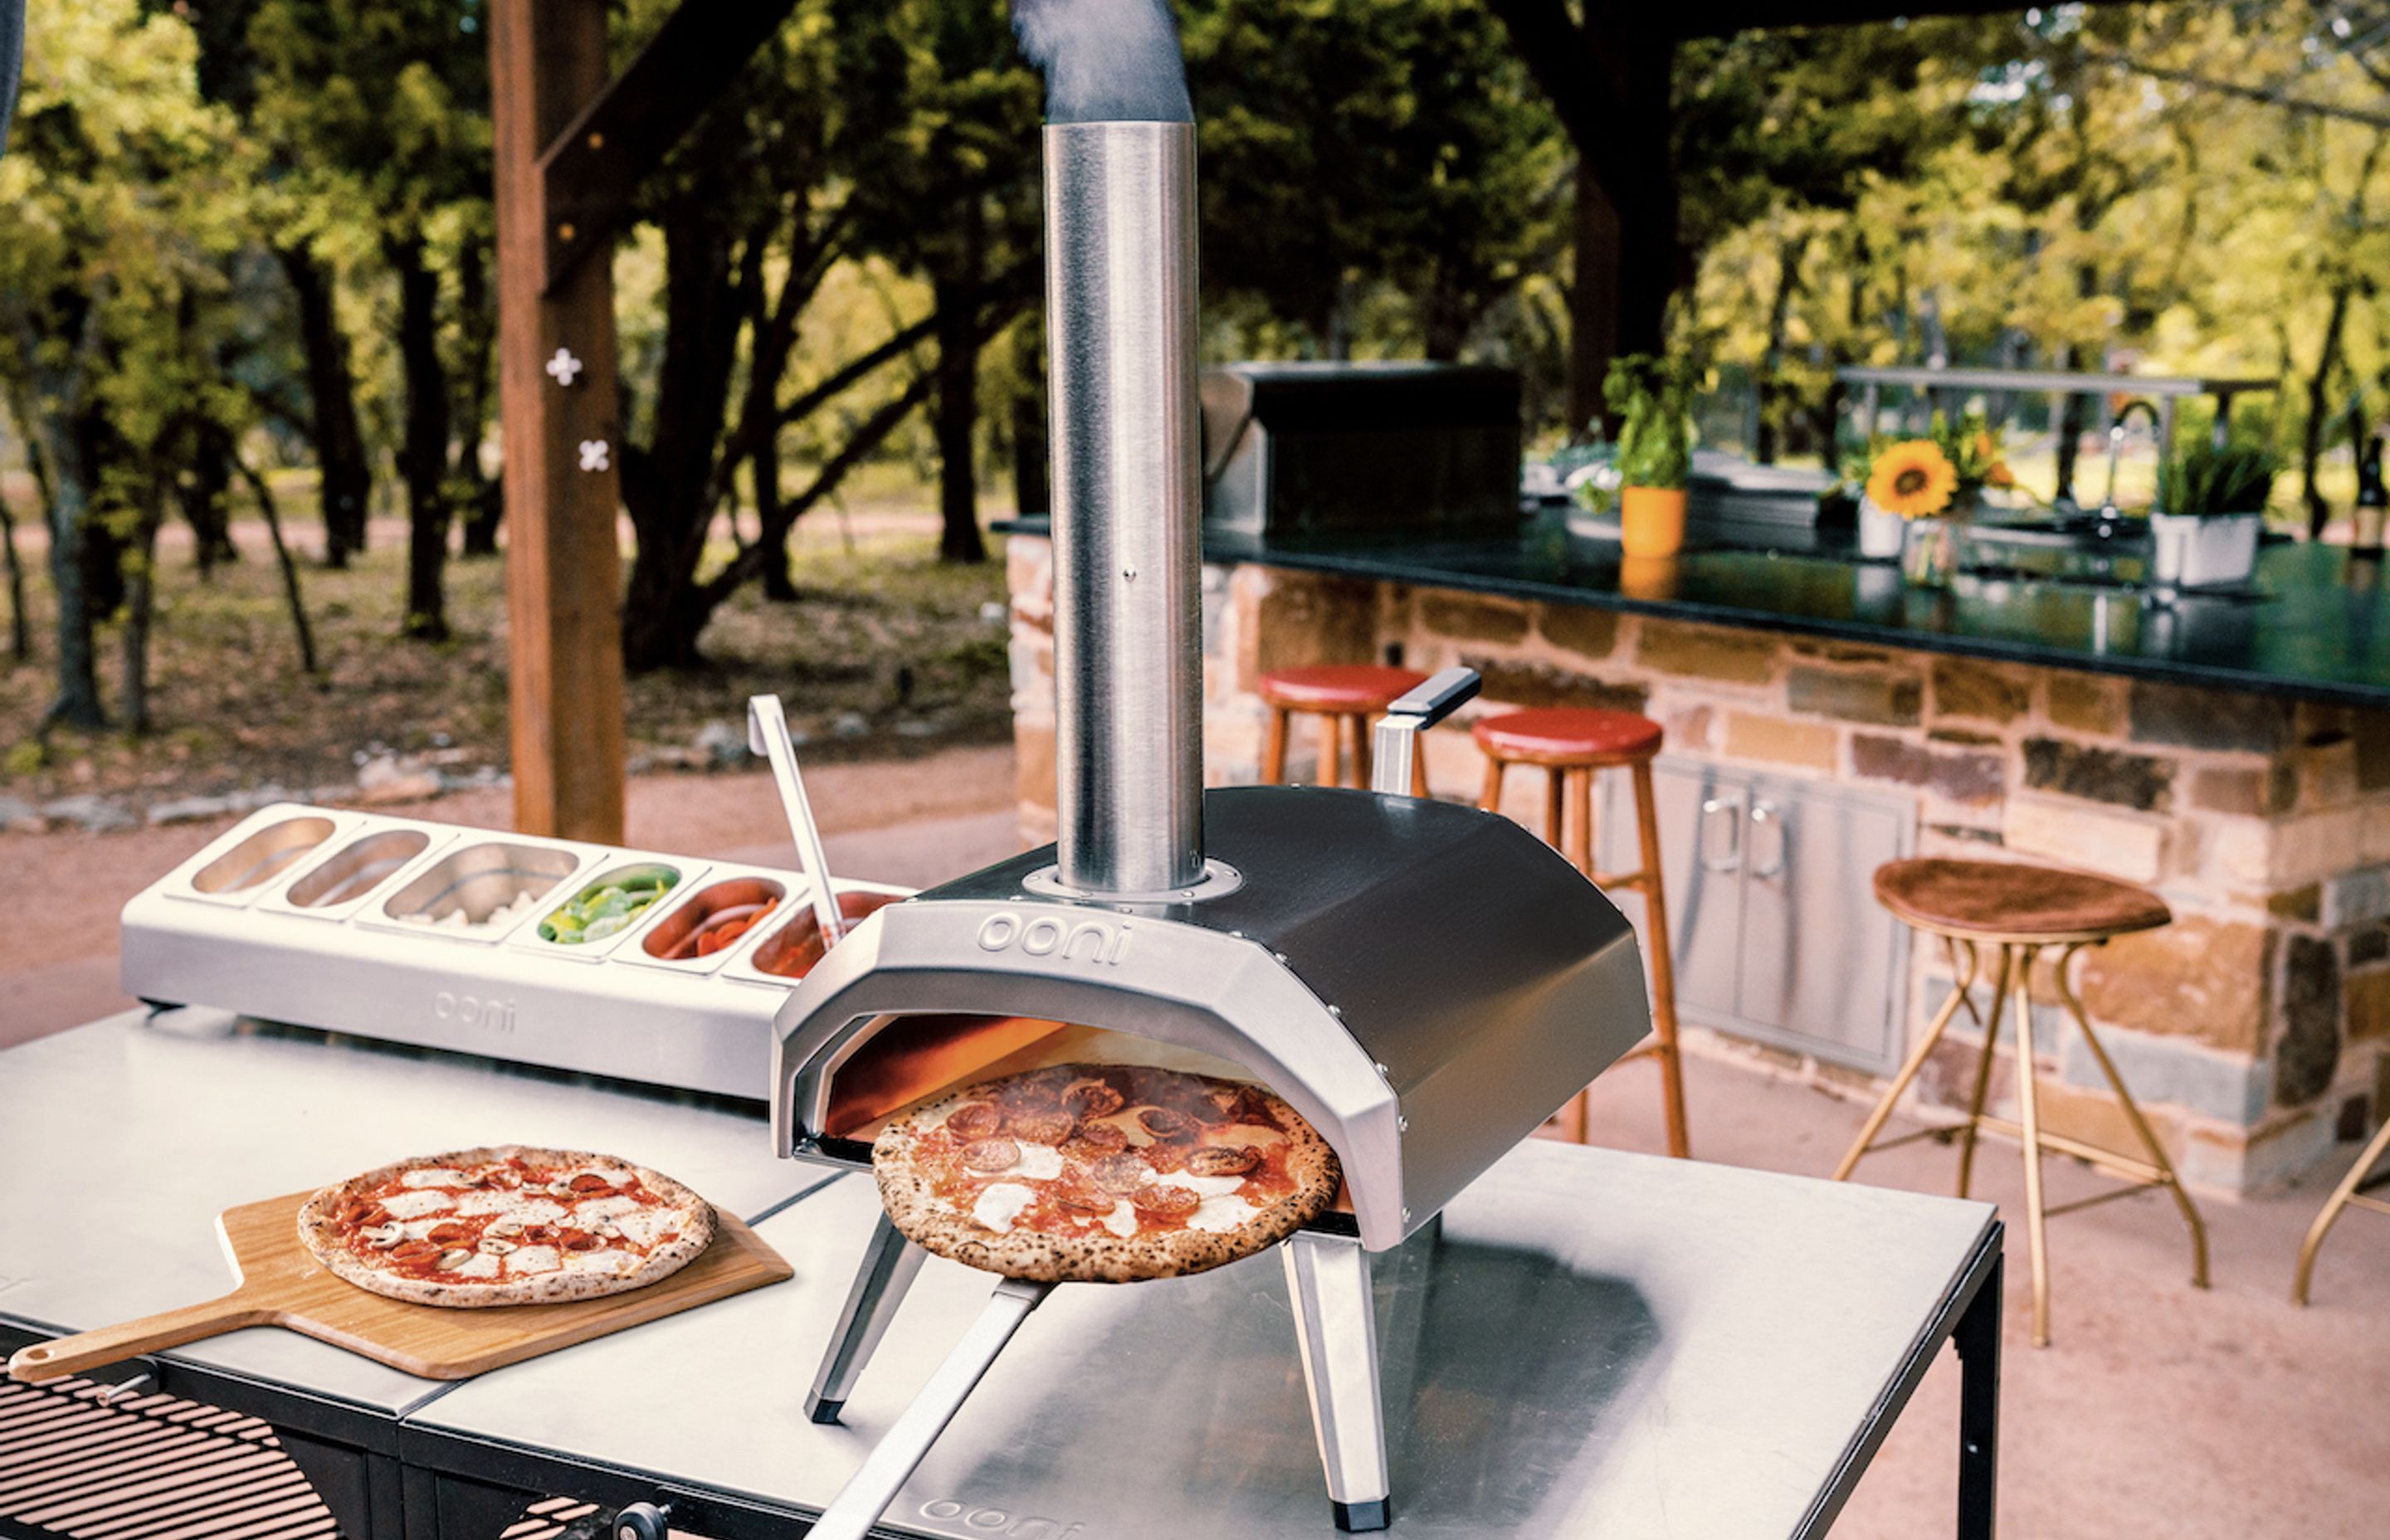 The product was born from a husband and wife duo's desire to create a cost-effective pizza oven.